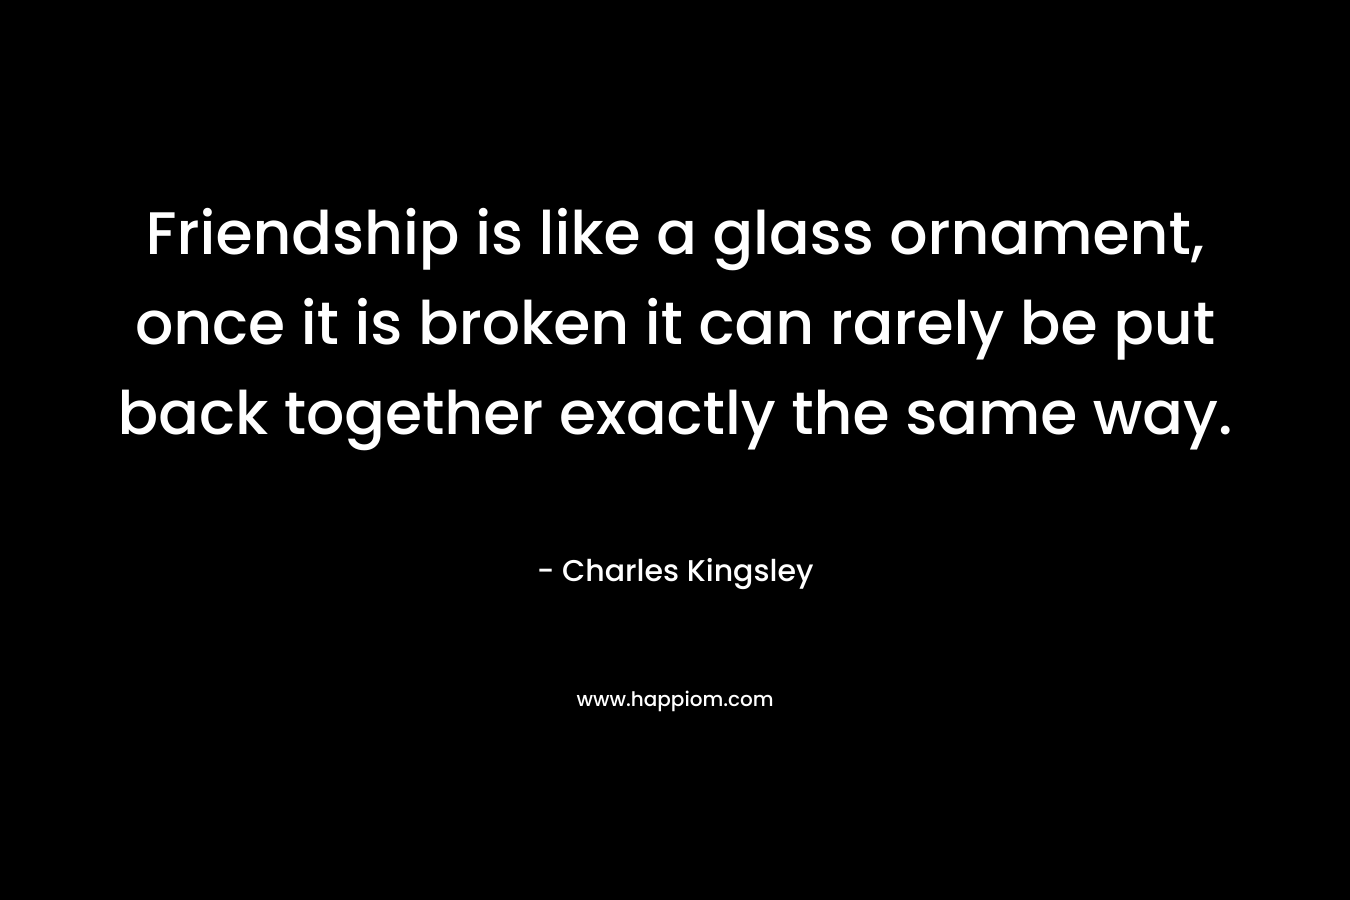 Friendship is like a glass ornament, once it is broken it can rarely be put back together exactly the same way. – Charles Kingsley